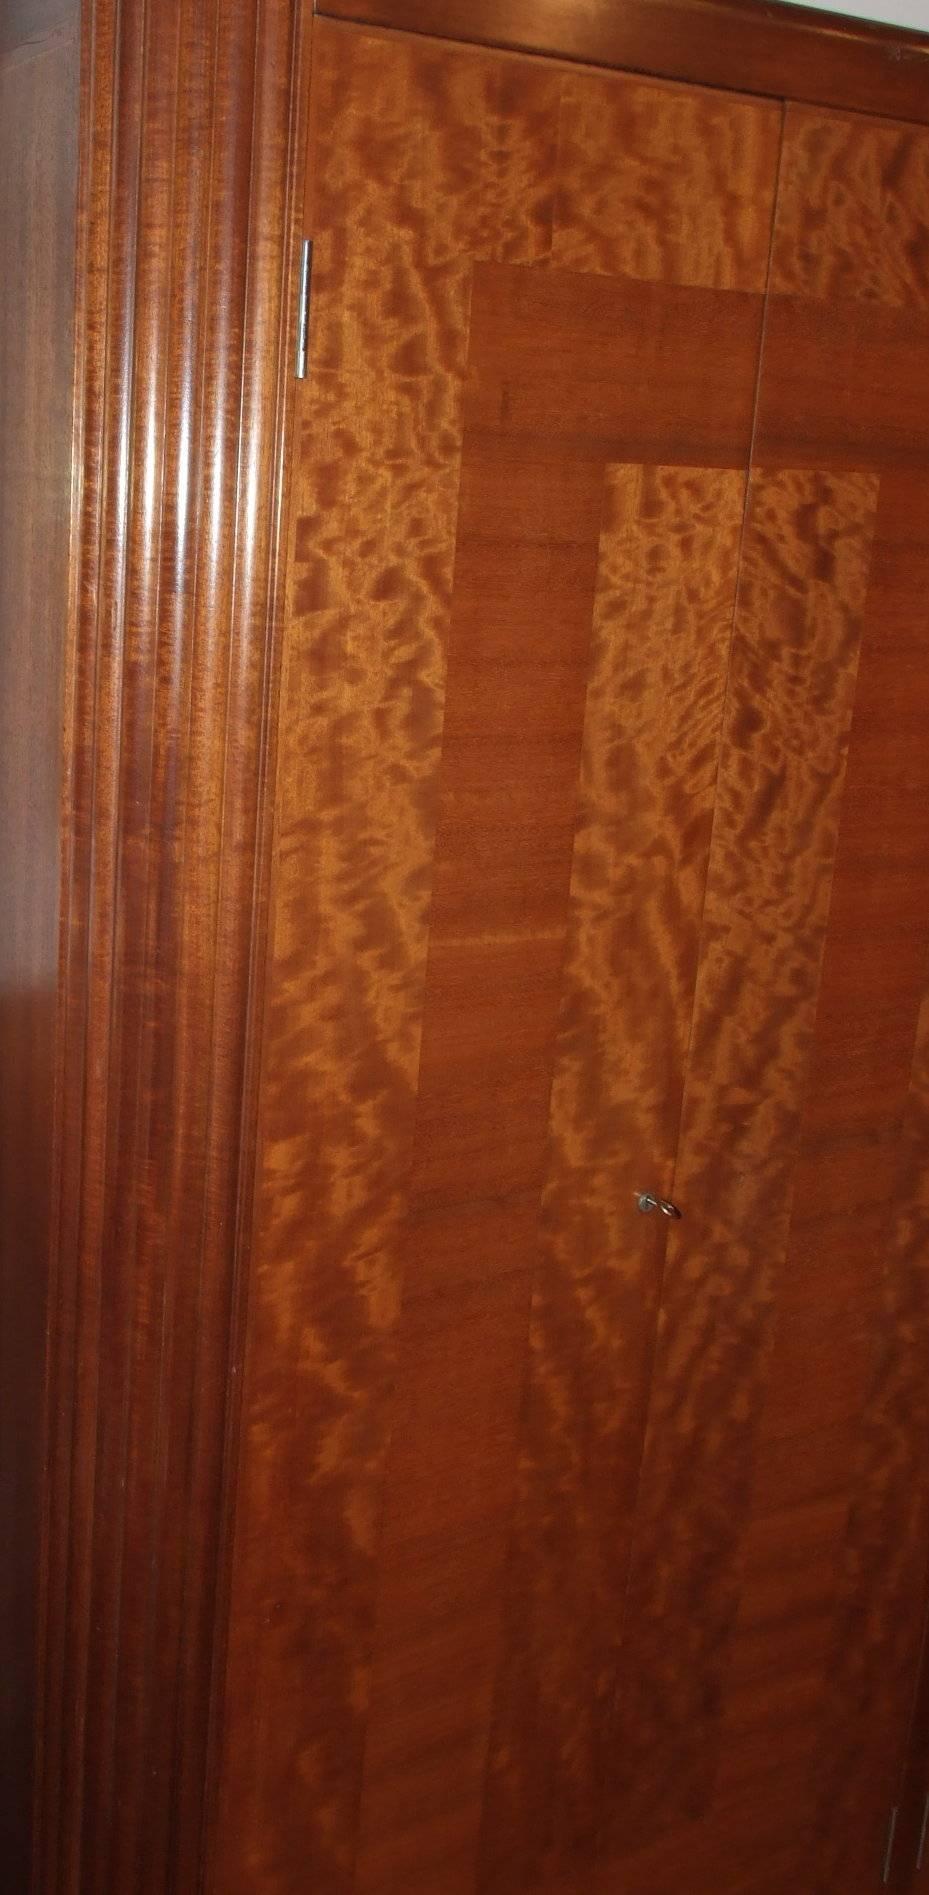 A Queensland walnut and cherry mahogany (makore wood) unusual four door wardrobe with reeded edges on stained plinth, cross-banded pattern to the doors, the interior of tongue and groove cedar (stamped Little Rock Arkansas) with dowel supports for